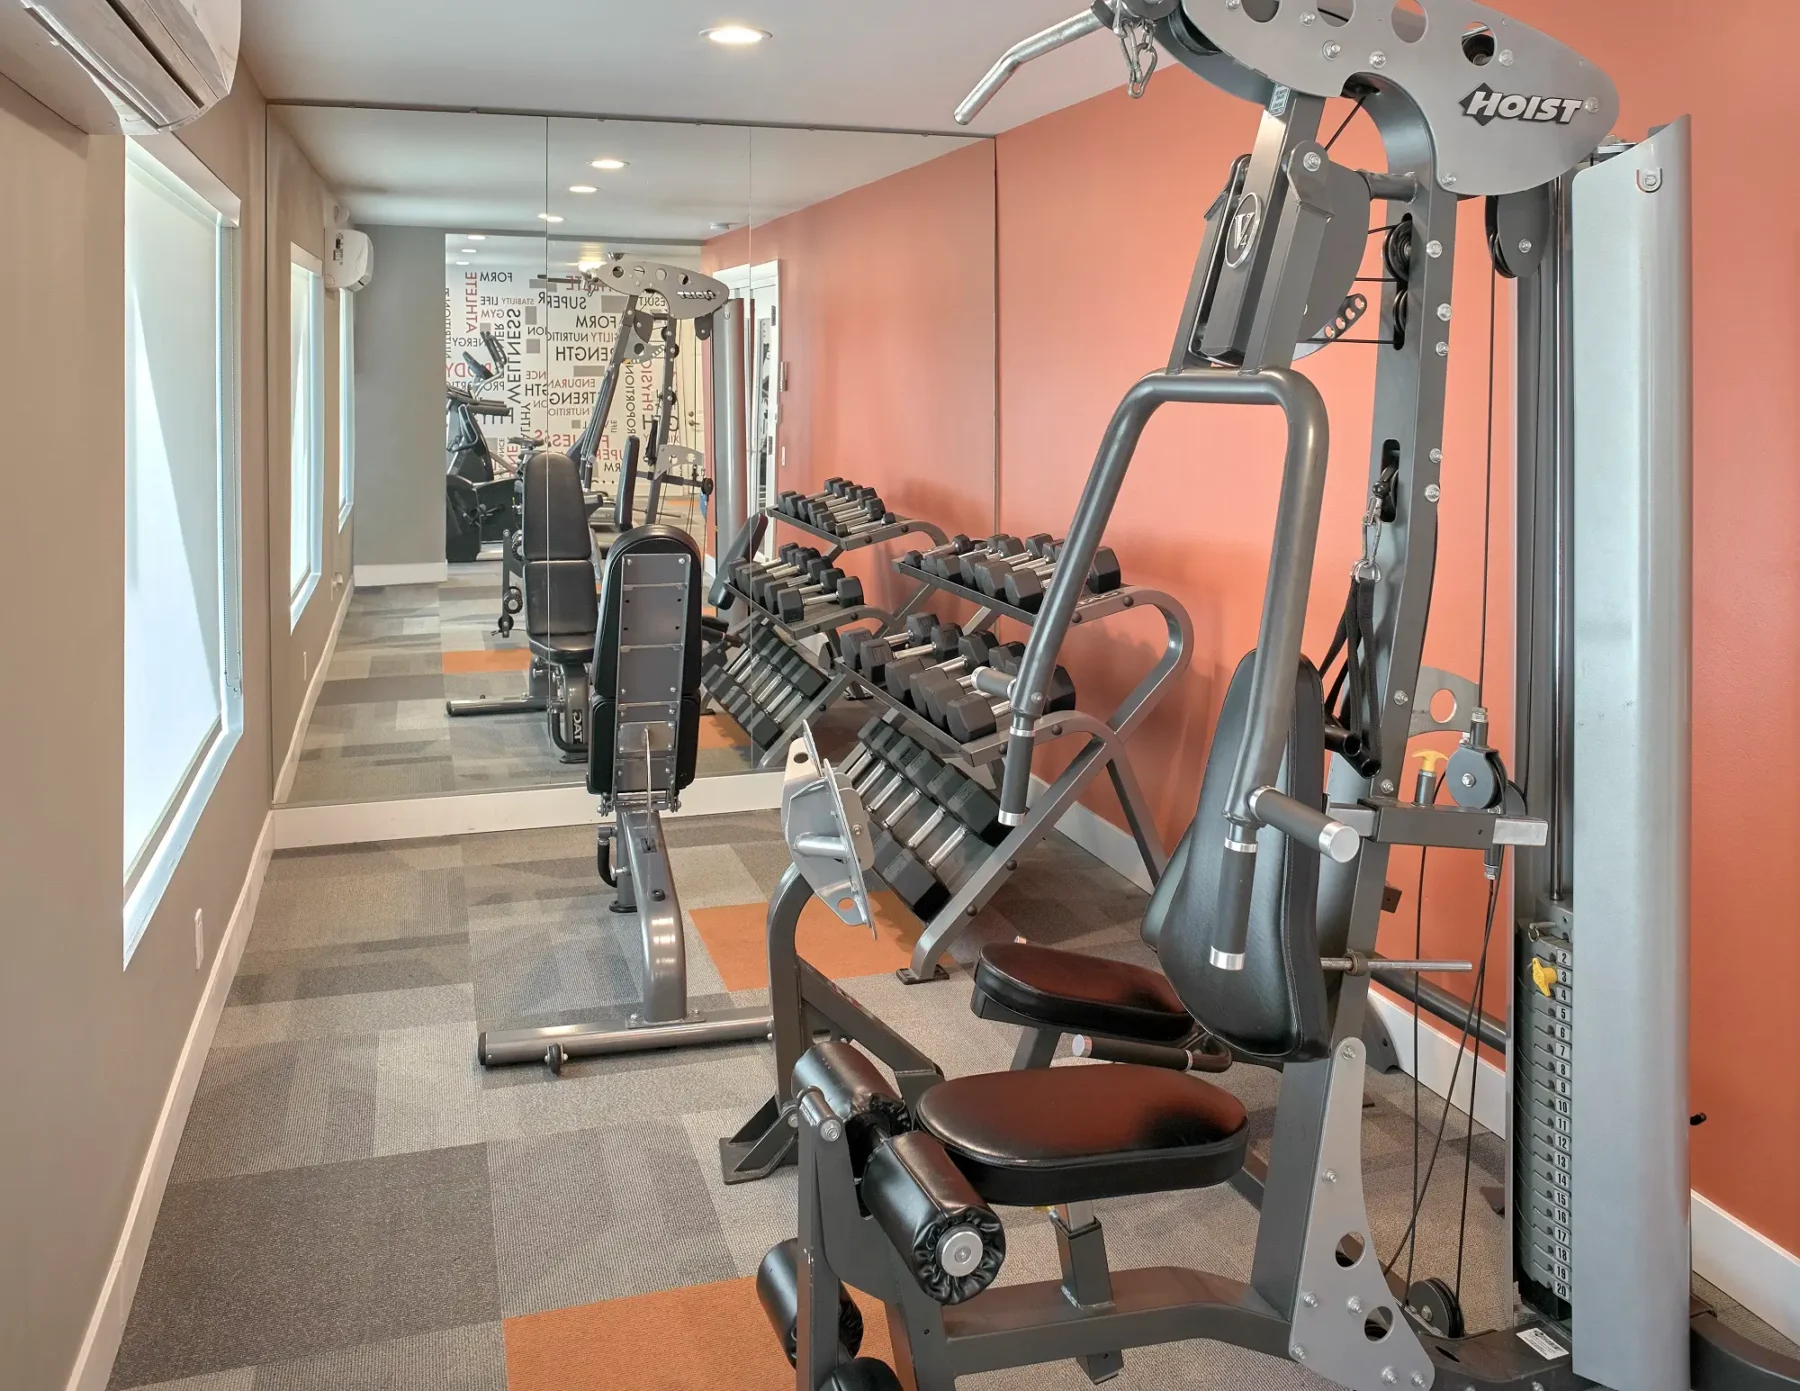 Irwin Park fitness center with gym machines and equipment.